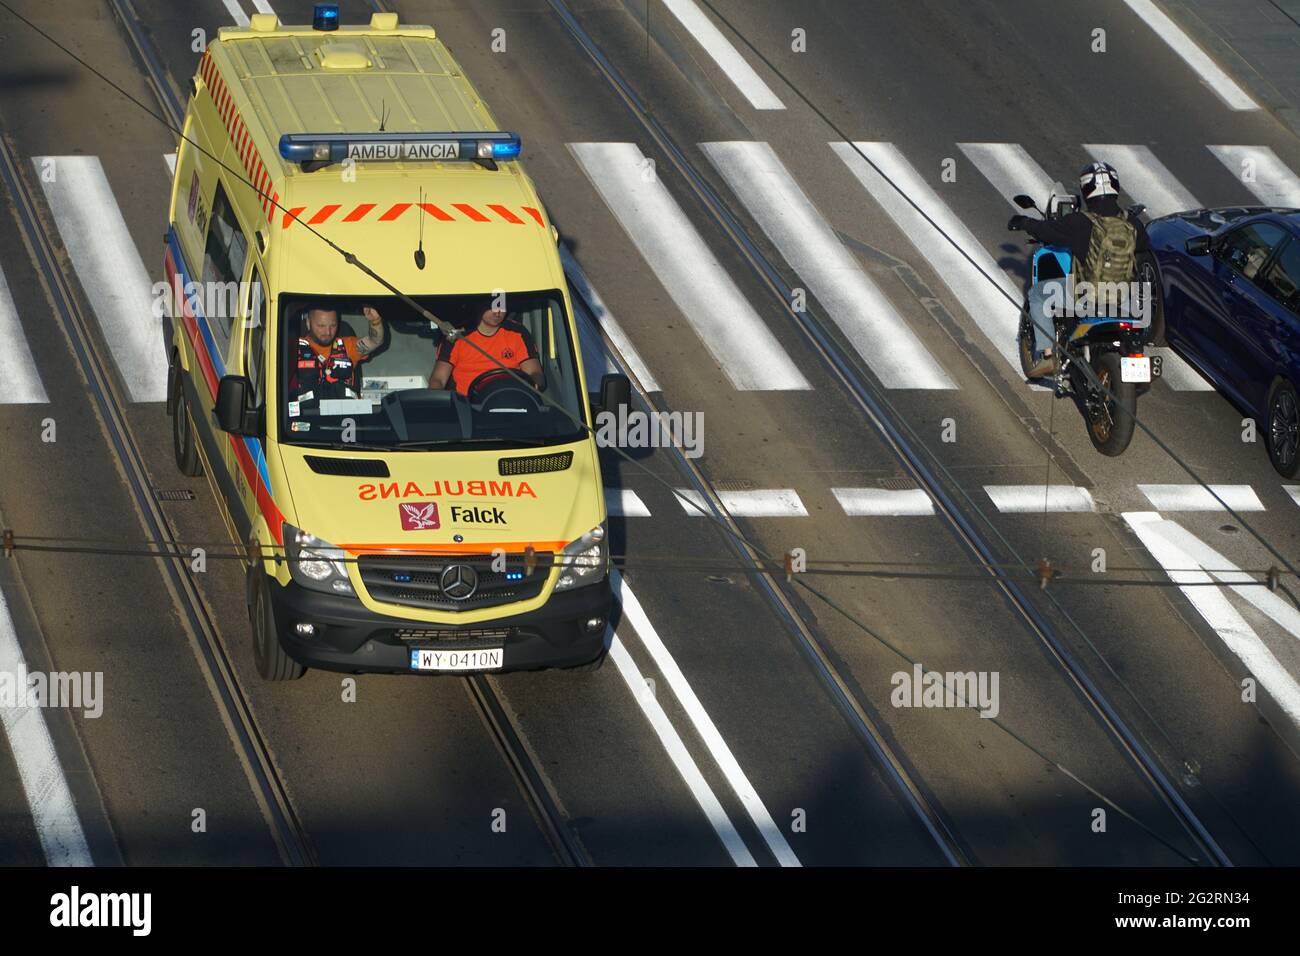 Warsaw, Poland - June 11, 2021: Yellow ambulance with flashing lights on rushing on tram track to bypass traffic jam on near the Warsaw Old Town. Stock Photo